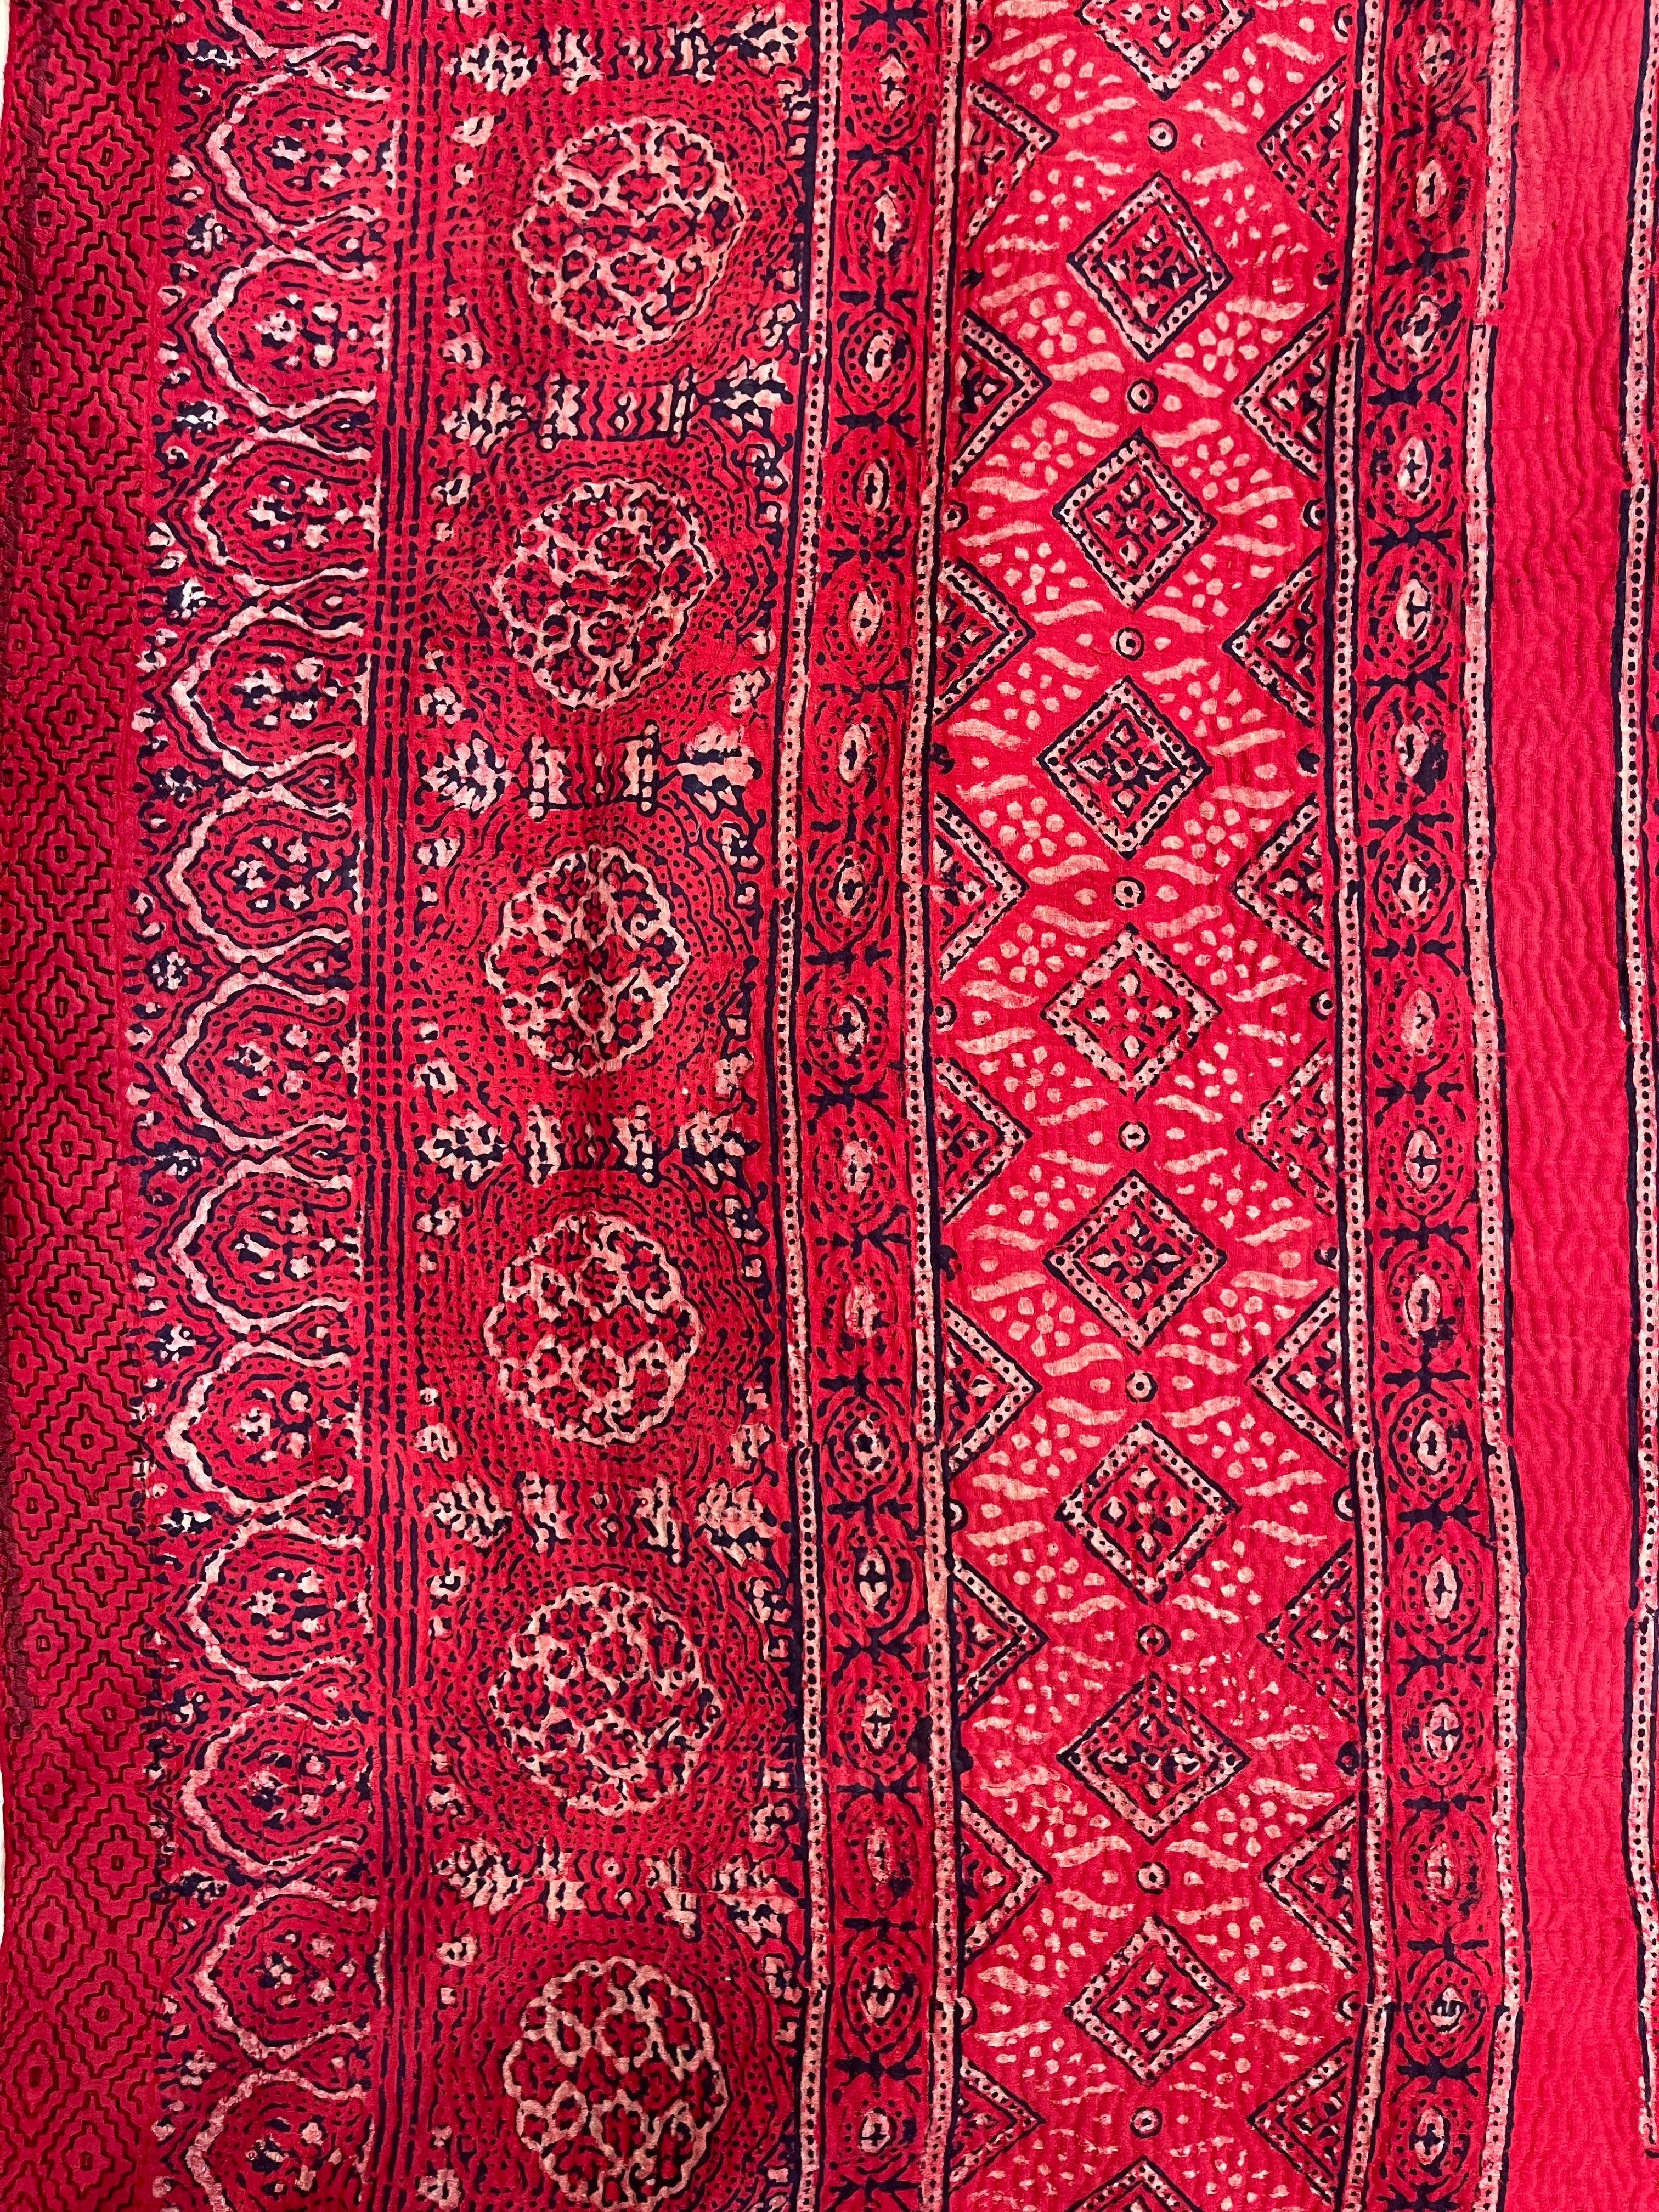 VINTAGE KANTHA - AJRAKH STAINED GLASS IN RED